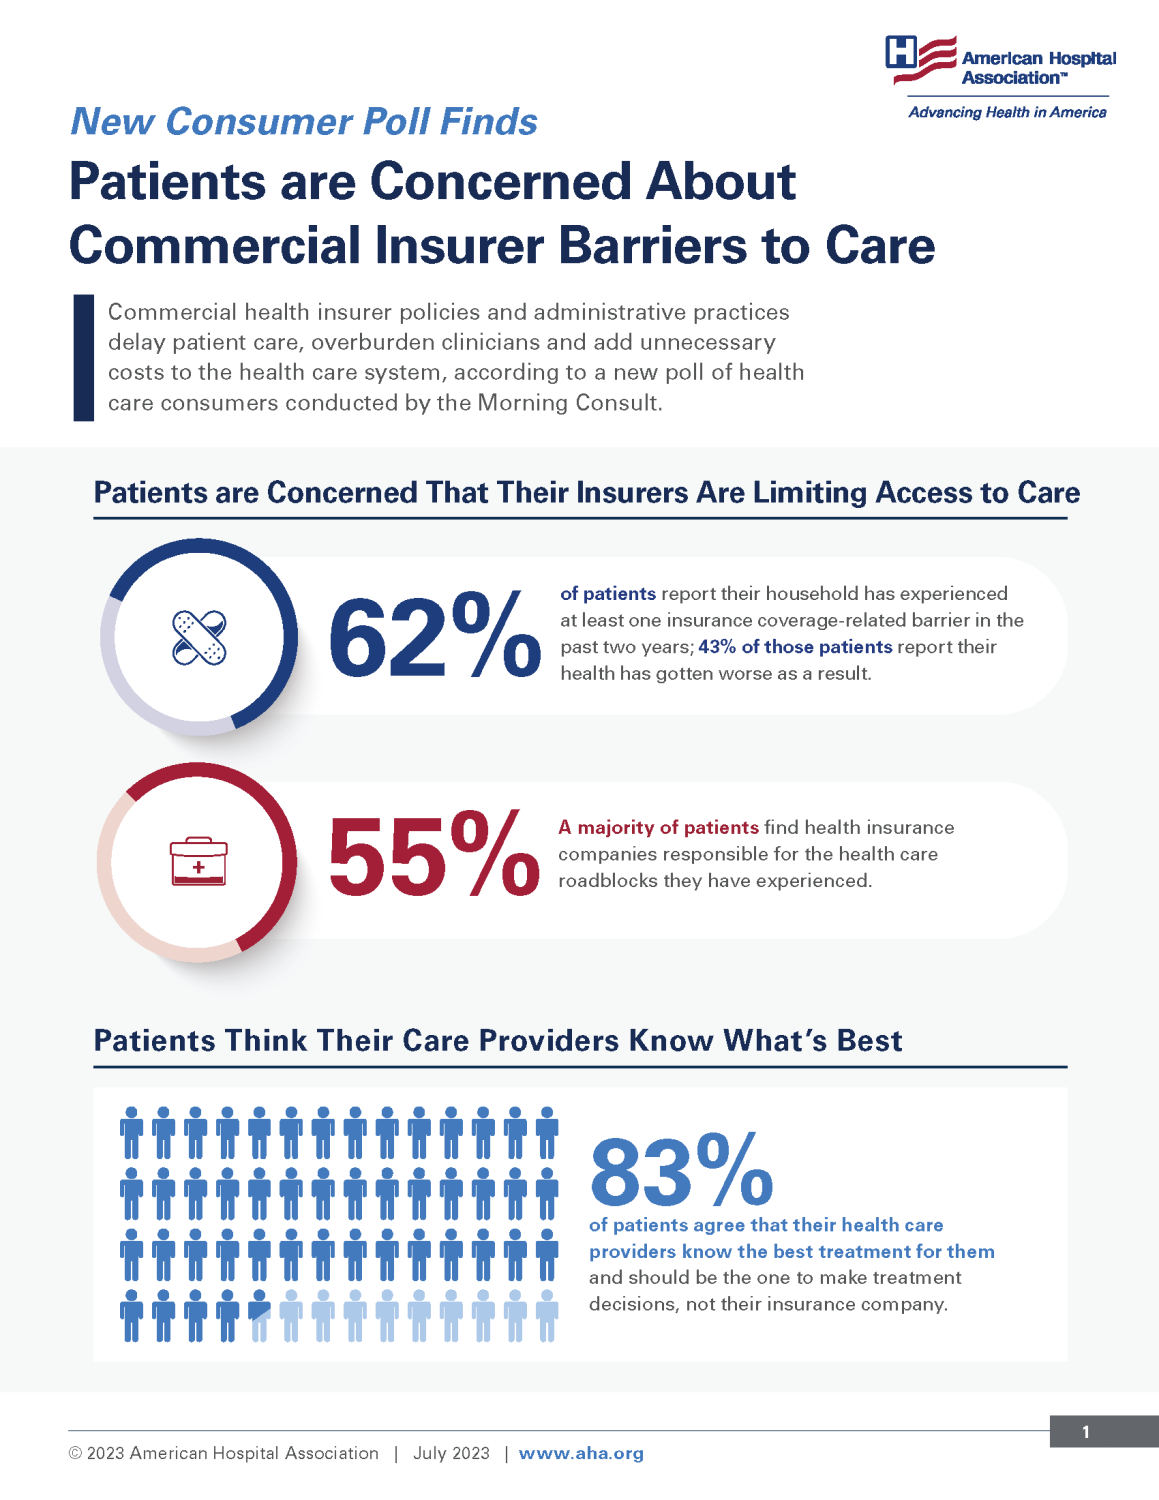 New Consumer Poll Finds Patients Are Concerned about Commercial Insurer Barriers to Care Infographic. Commercial health insurer policies and administrative practices delay patient care, overburden clinicians and add unnecessary costs to the health care system, according to a new poll of health care consumers conducted by the Morning Consult. Patients Are Concerned That Their Insurers Are Limiting Access to Care. 62% of patients report their household has experienced at least one insurance coverage-related b